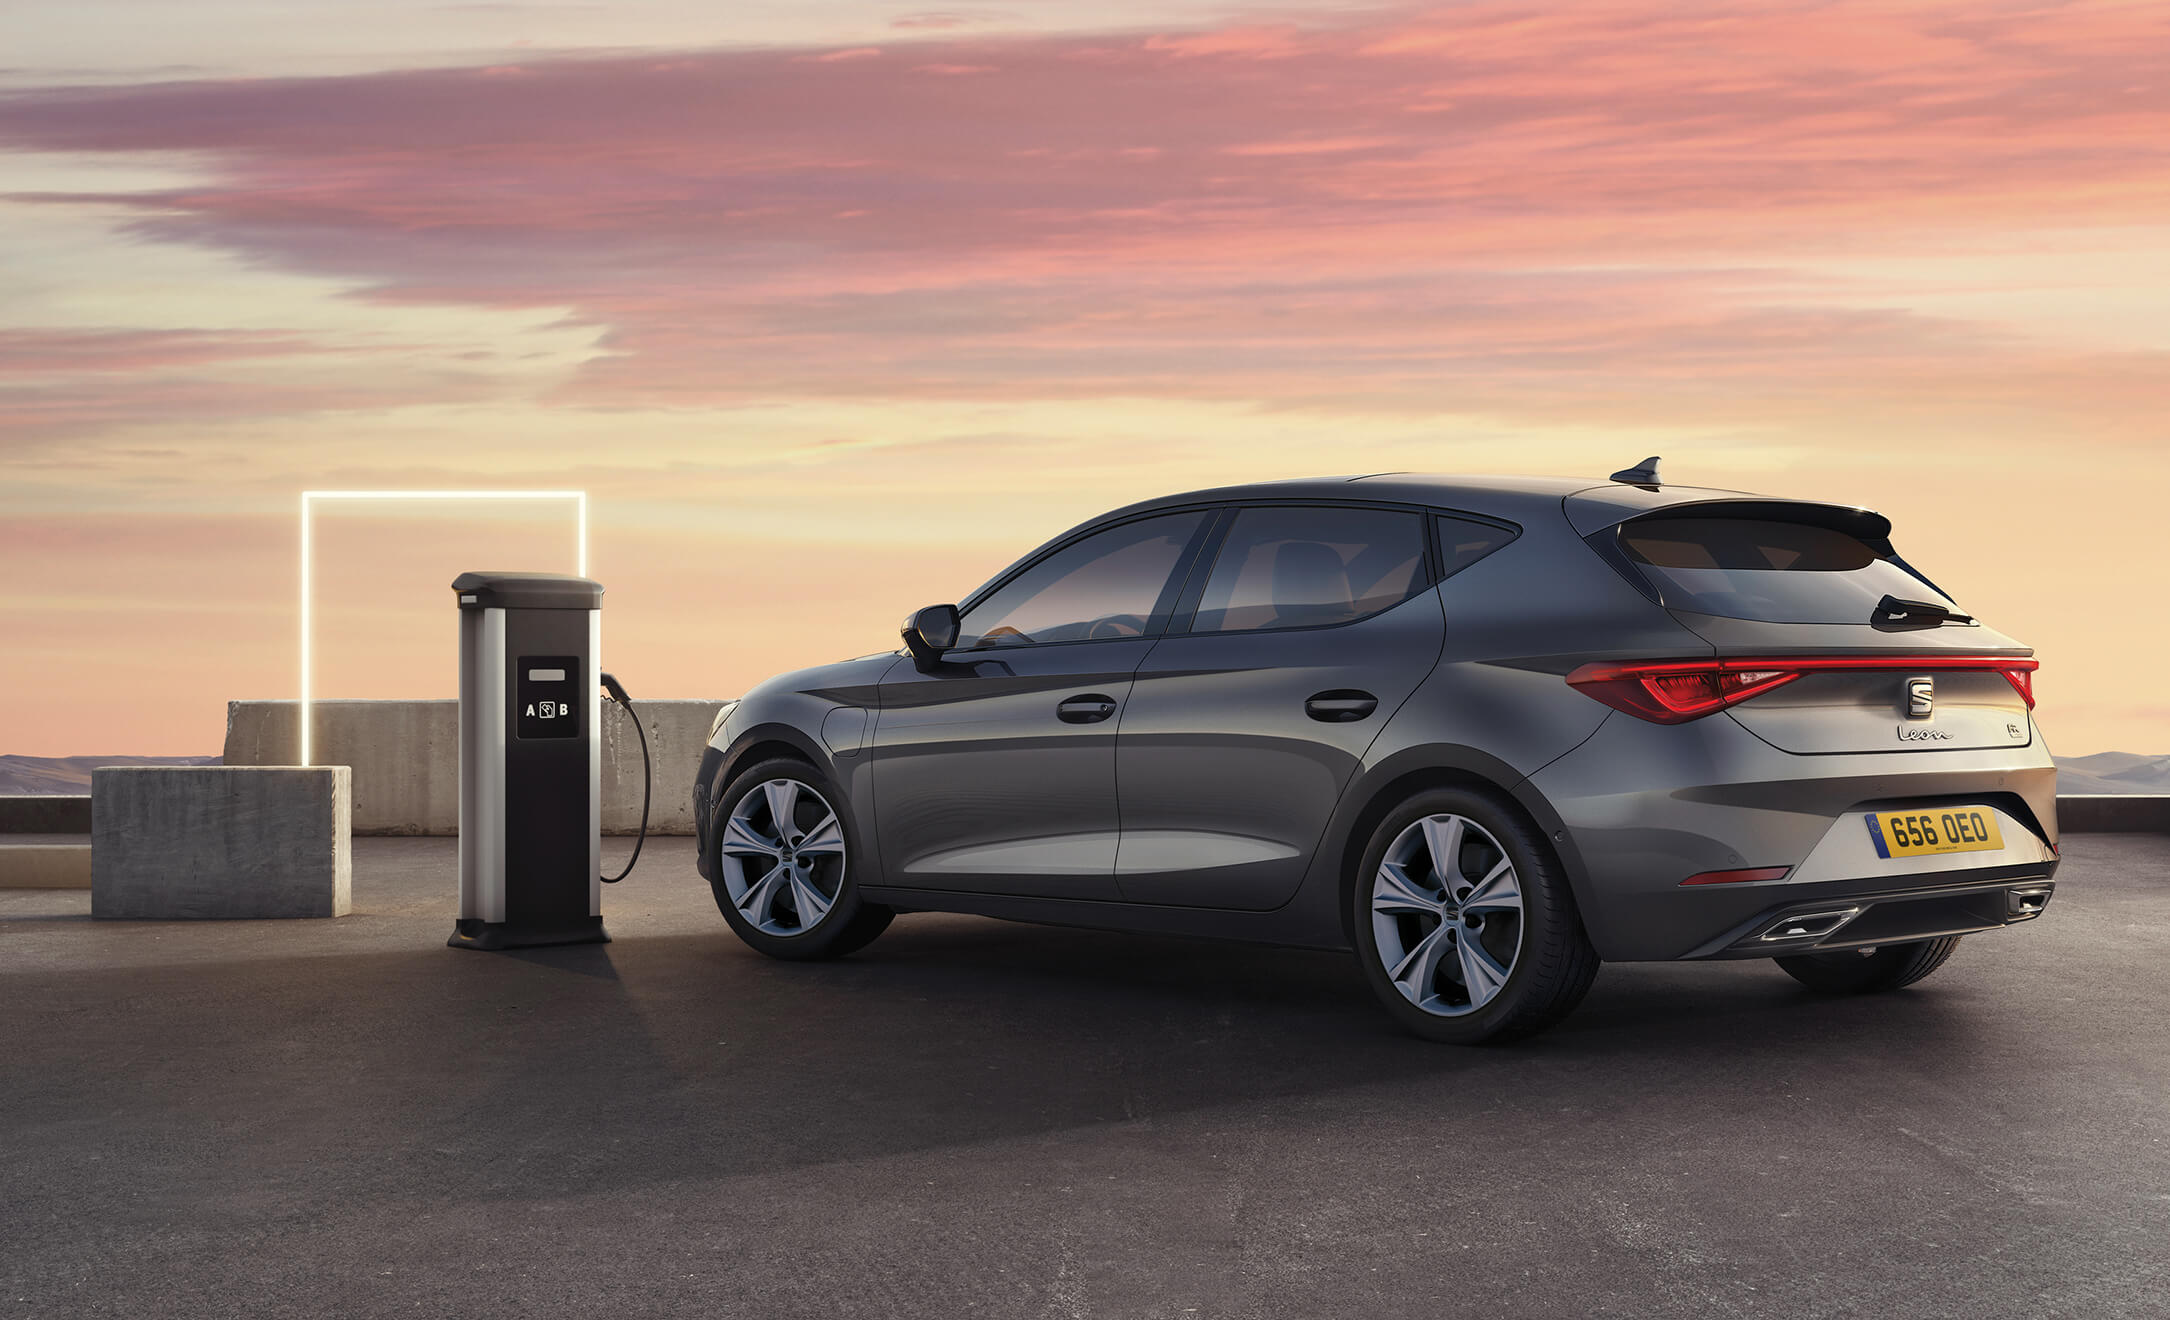 SEAT Leon e-HYBRID charging in front of sunset